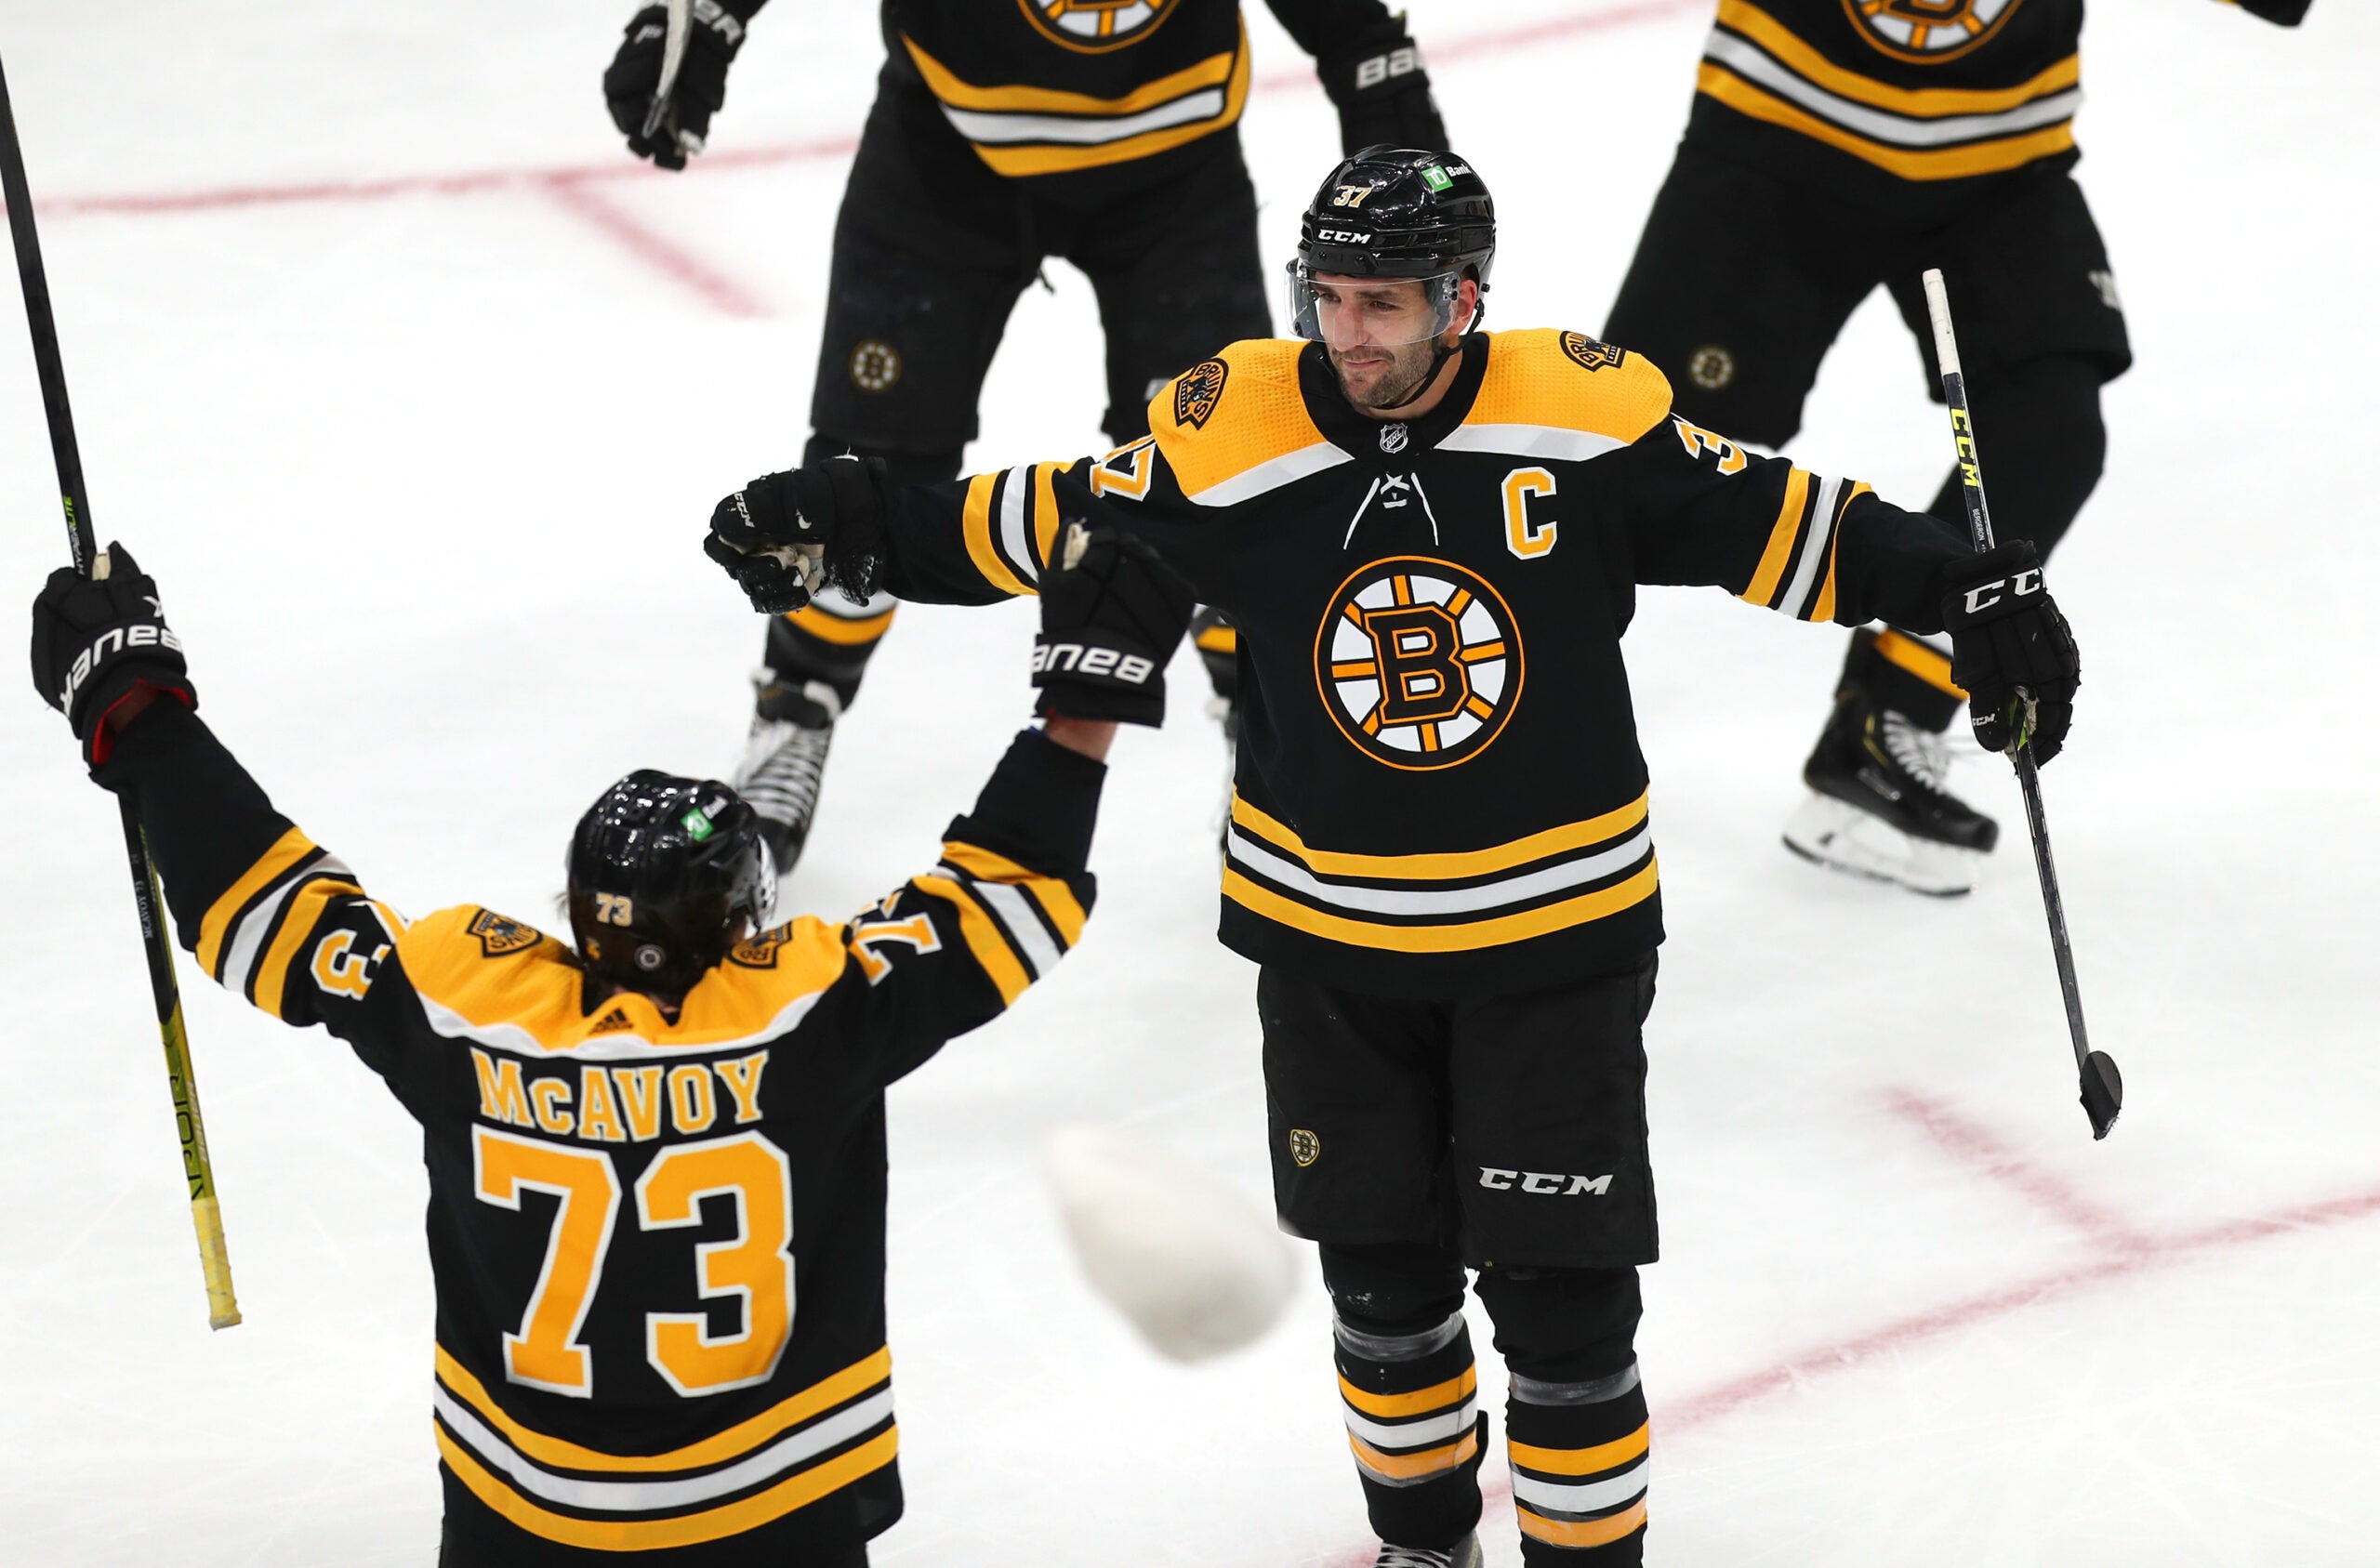 Boston Bruins center Patrice Bergeron (37) celebrates his hat trick goal in the 3rd period with Boston Bruins defenseman Charlie McAvoy (73), his 400th career goal.